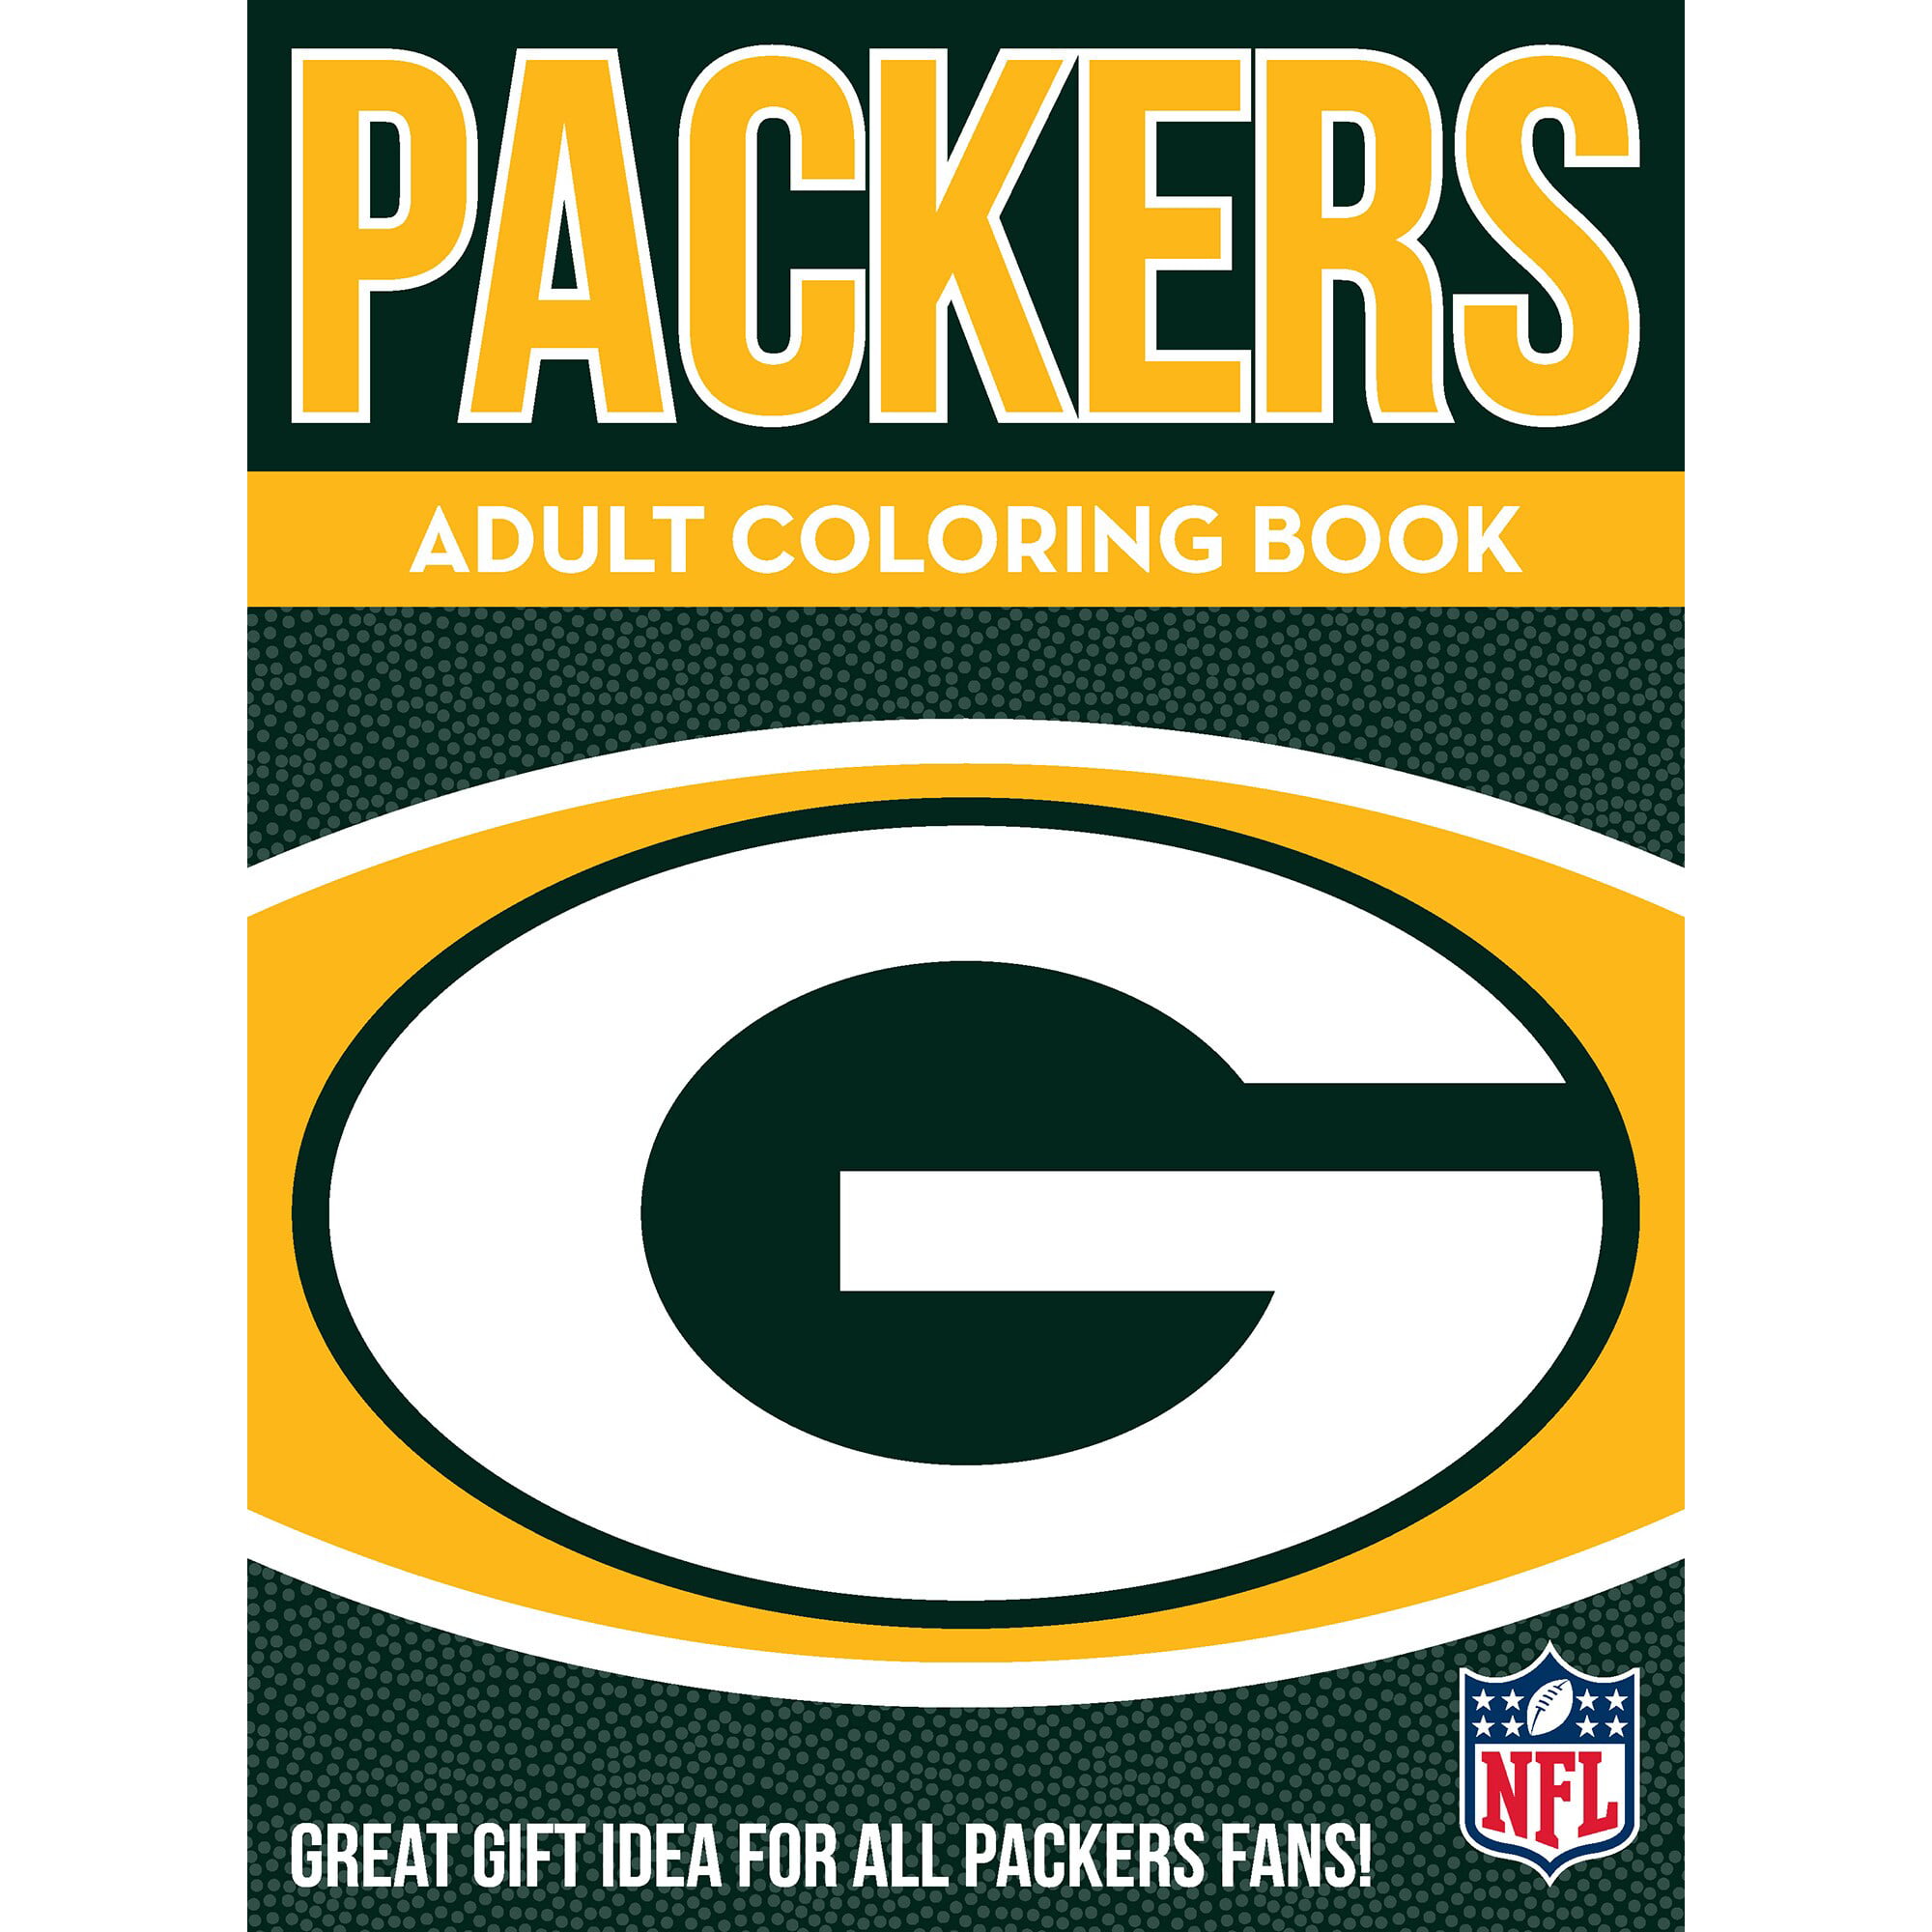 In the sports zone nfl adult coloring book green bay packers